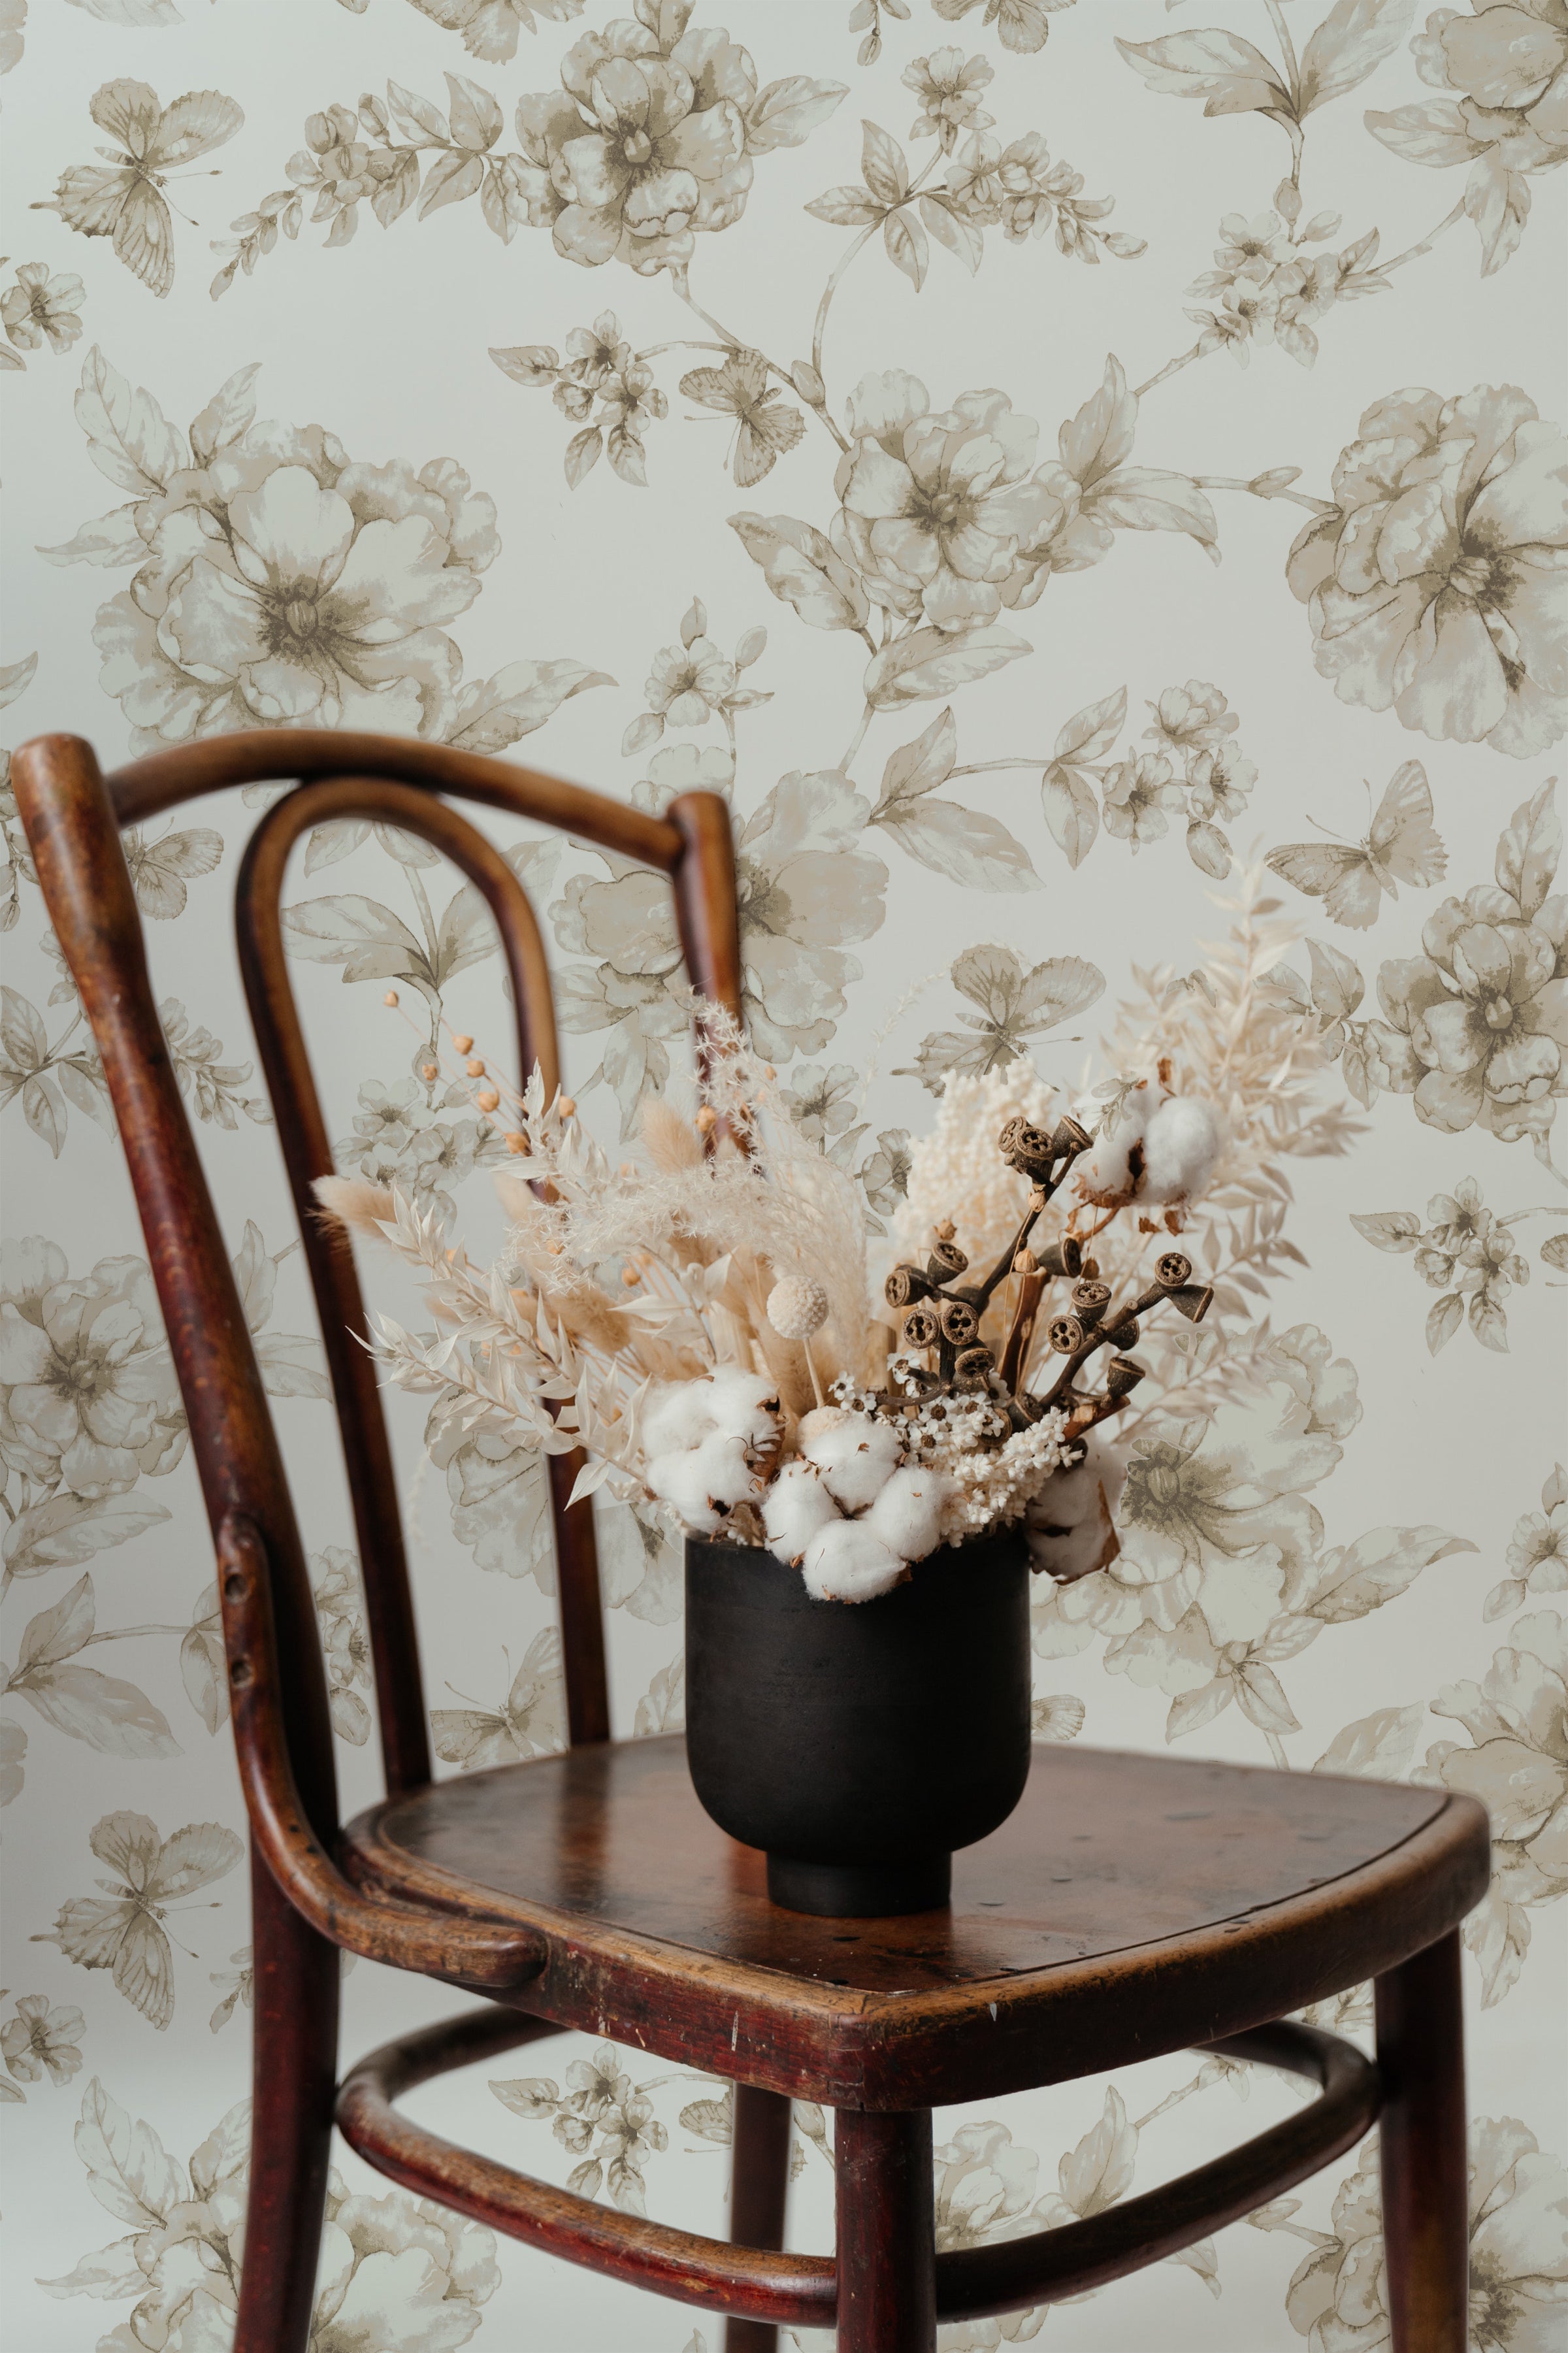 An elegant vintage wooden chair in front of a wall adorned with the Sepia Trellis Wallpaper featuring intricate floral designs in sepia tones. A rustic vase with dried flowers complements the timeless appeal of the wallpaper.